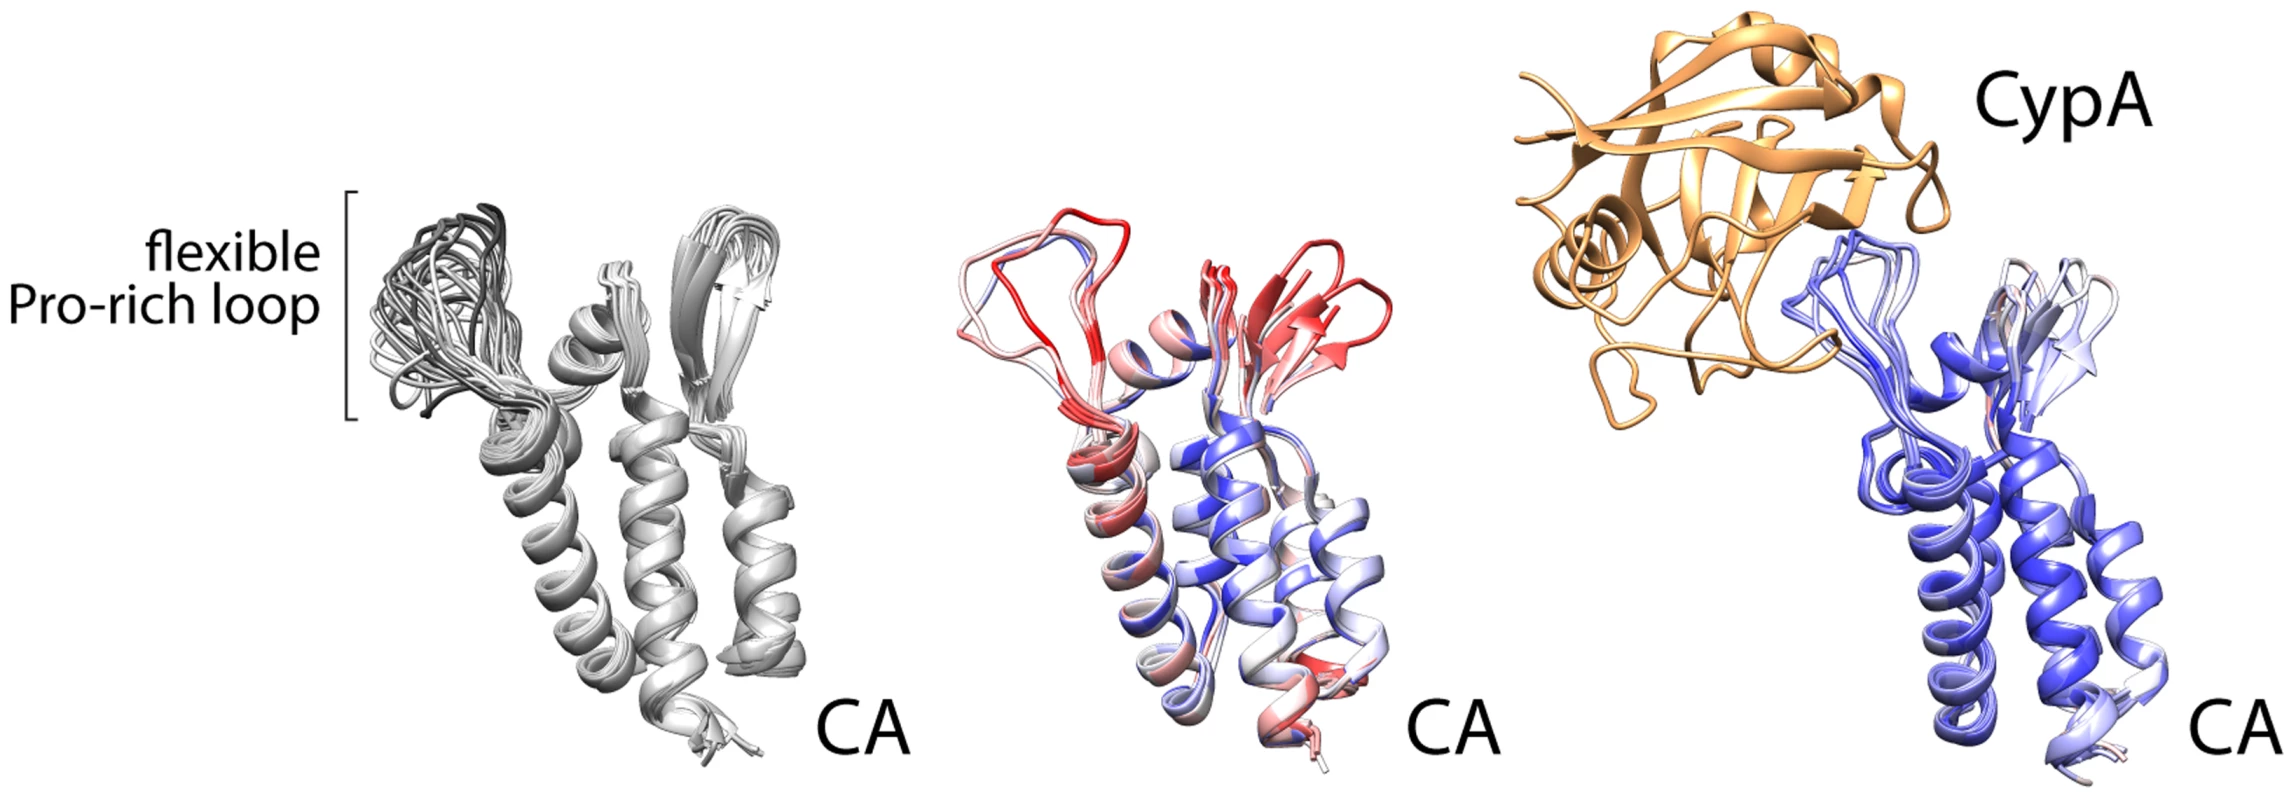 Cyclophilin A binds a flexible loop in the HIV CA, containing glycine 89 and proline 90 and flanked by prolines.